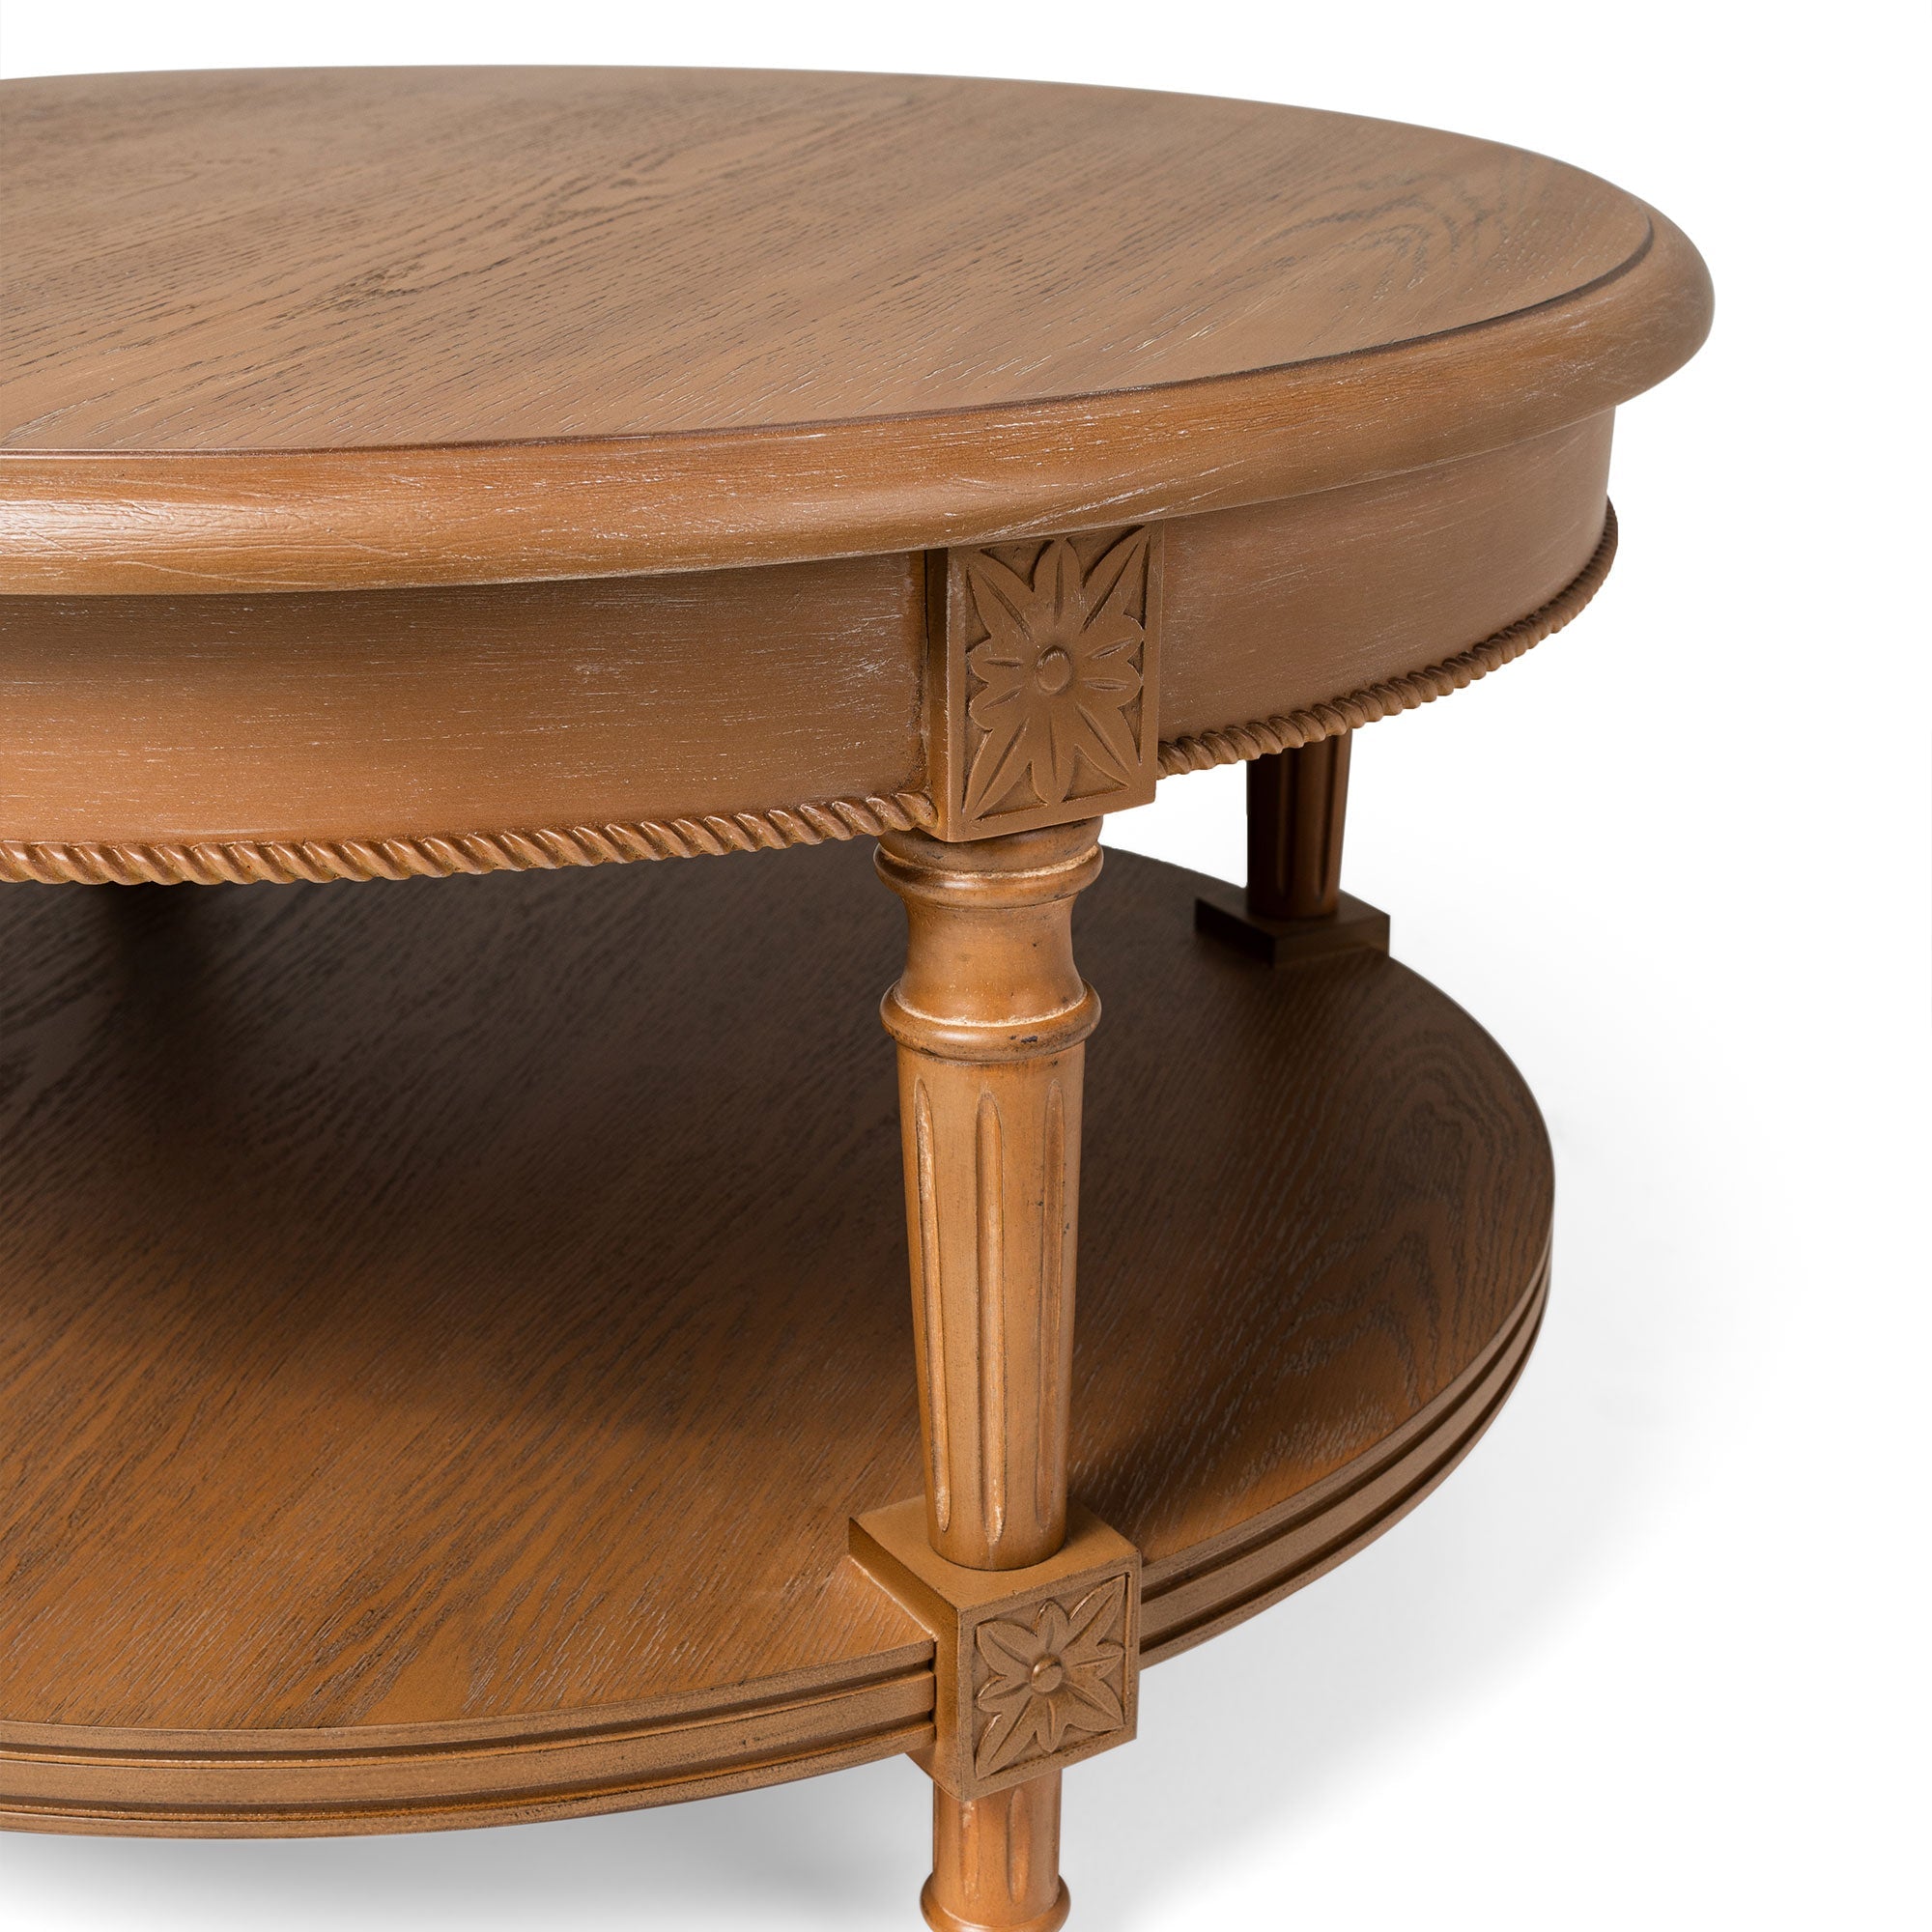 Pullman Traditional Round Wooden Coffee Table in Antiqued Natural Finish in Accent Tables by Maven Lane